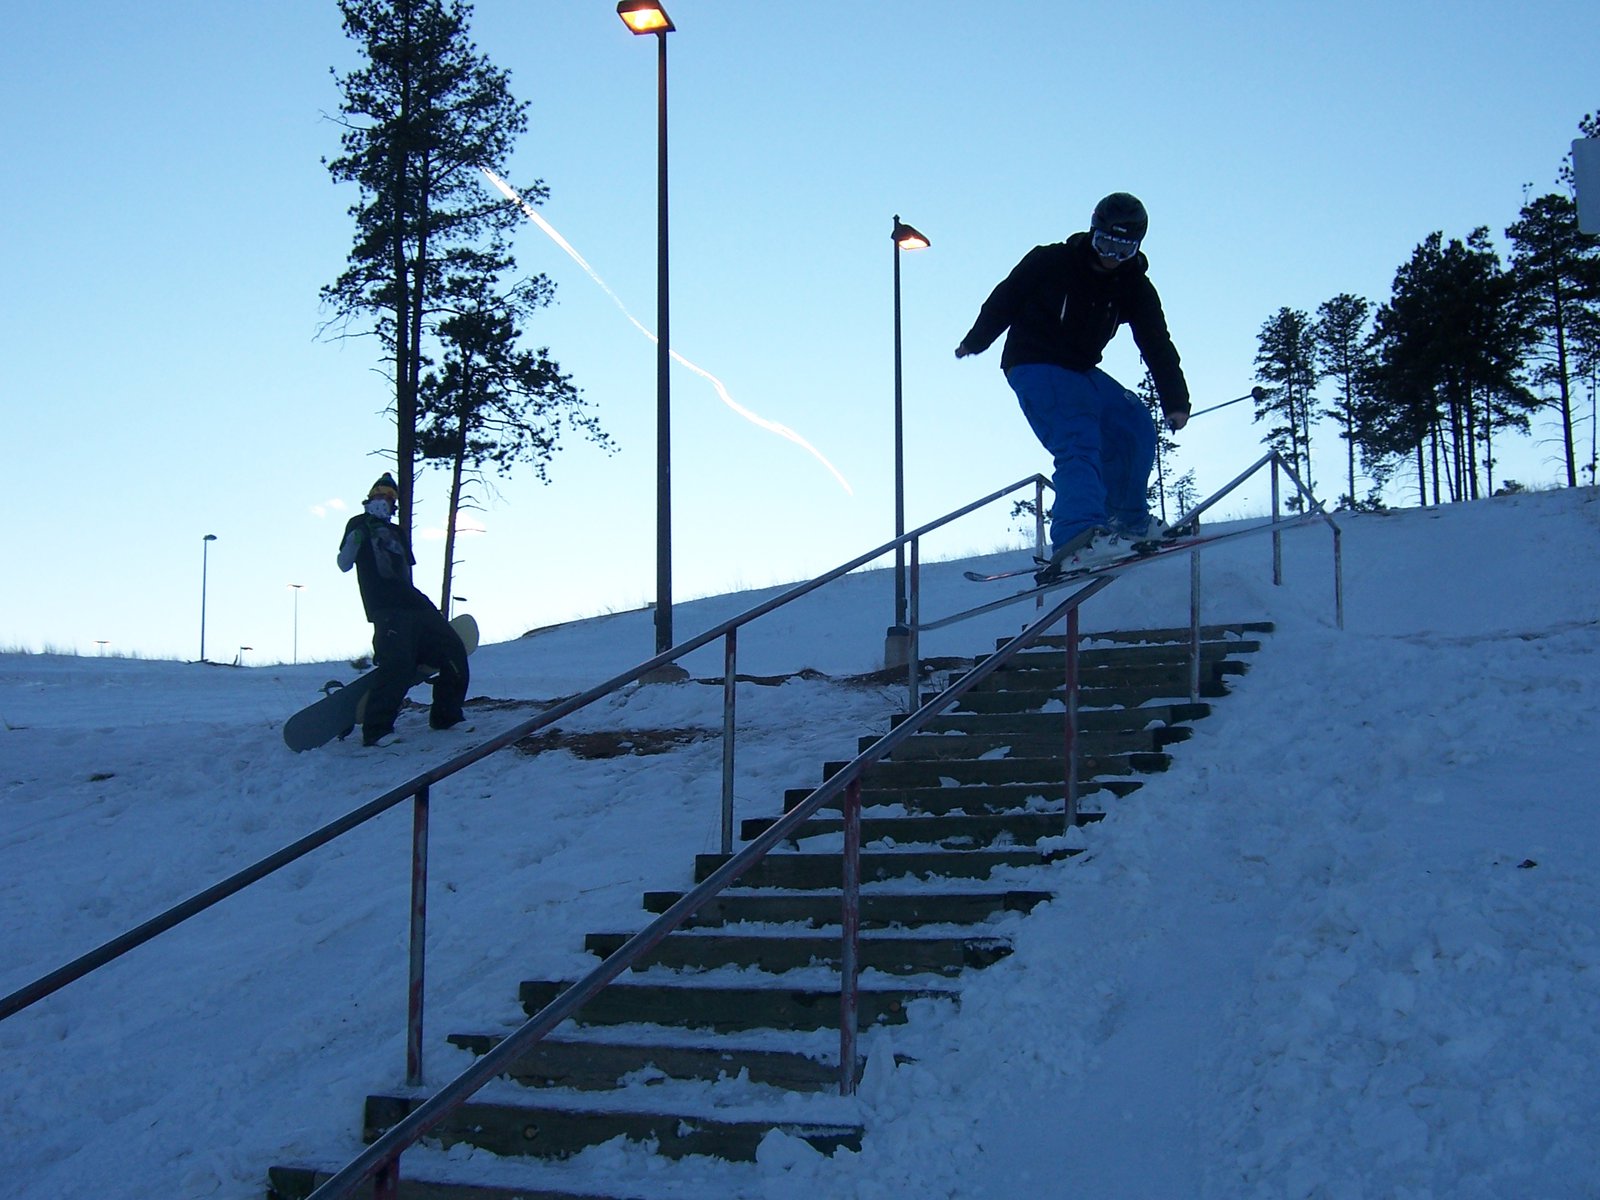 26 Stair at Conifer